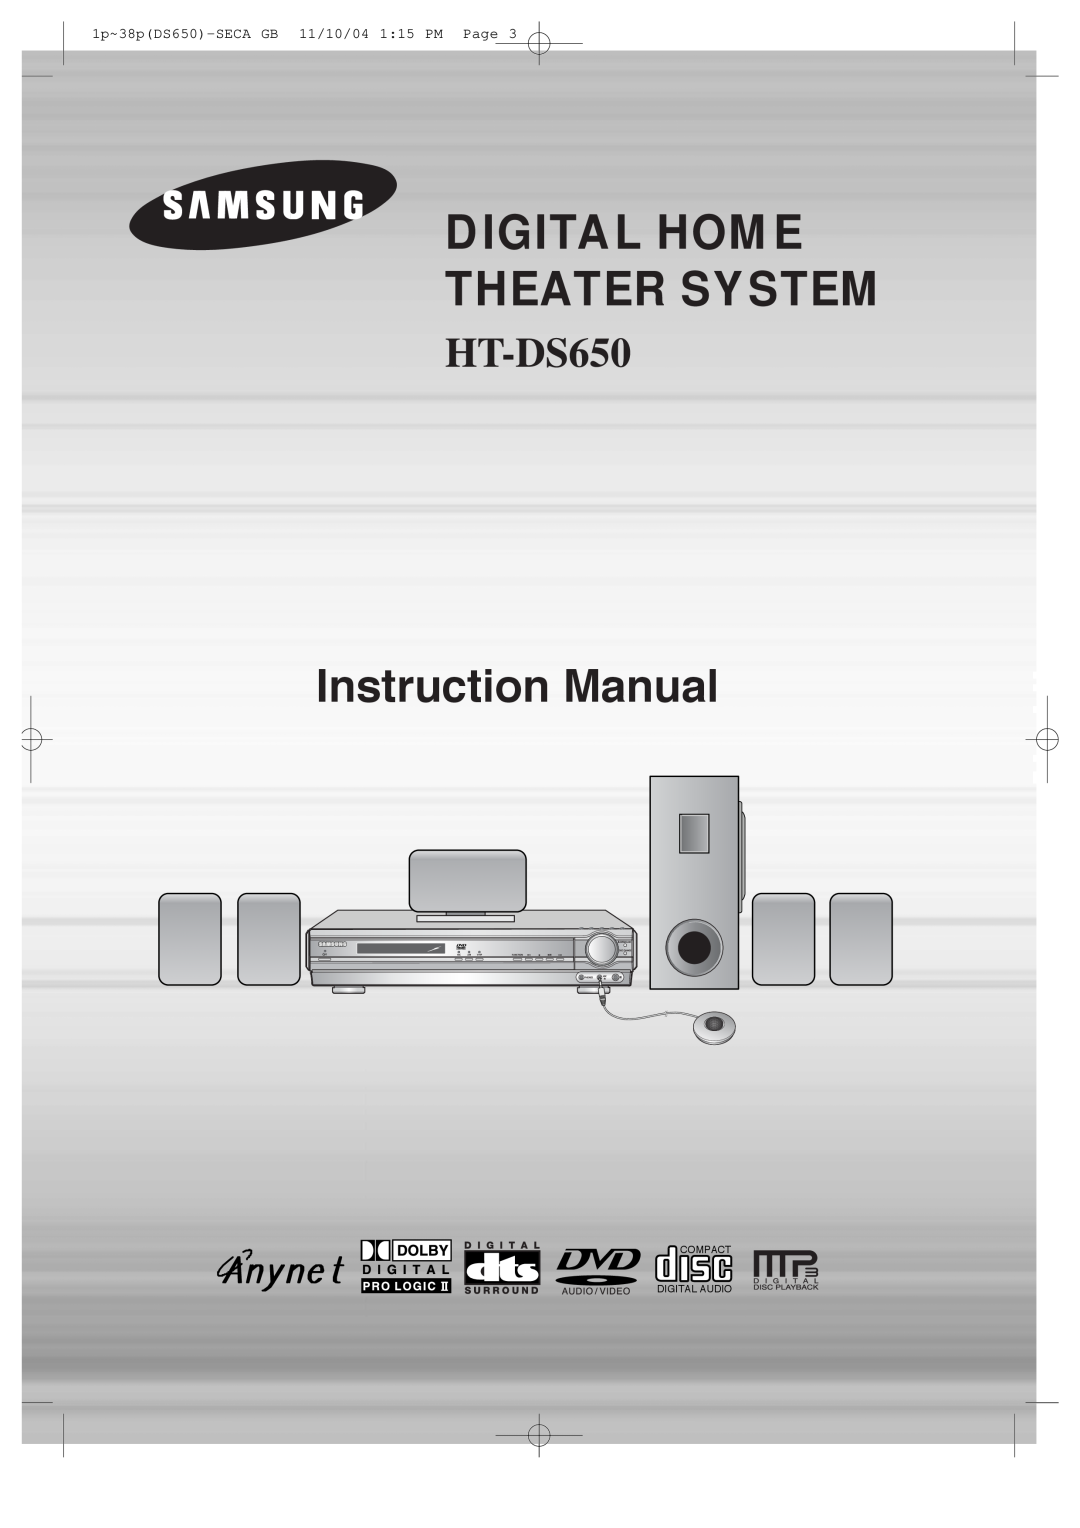 Samsung HT-DS650 instruction manual Digital Home Theater System, Instruction Manual 